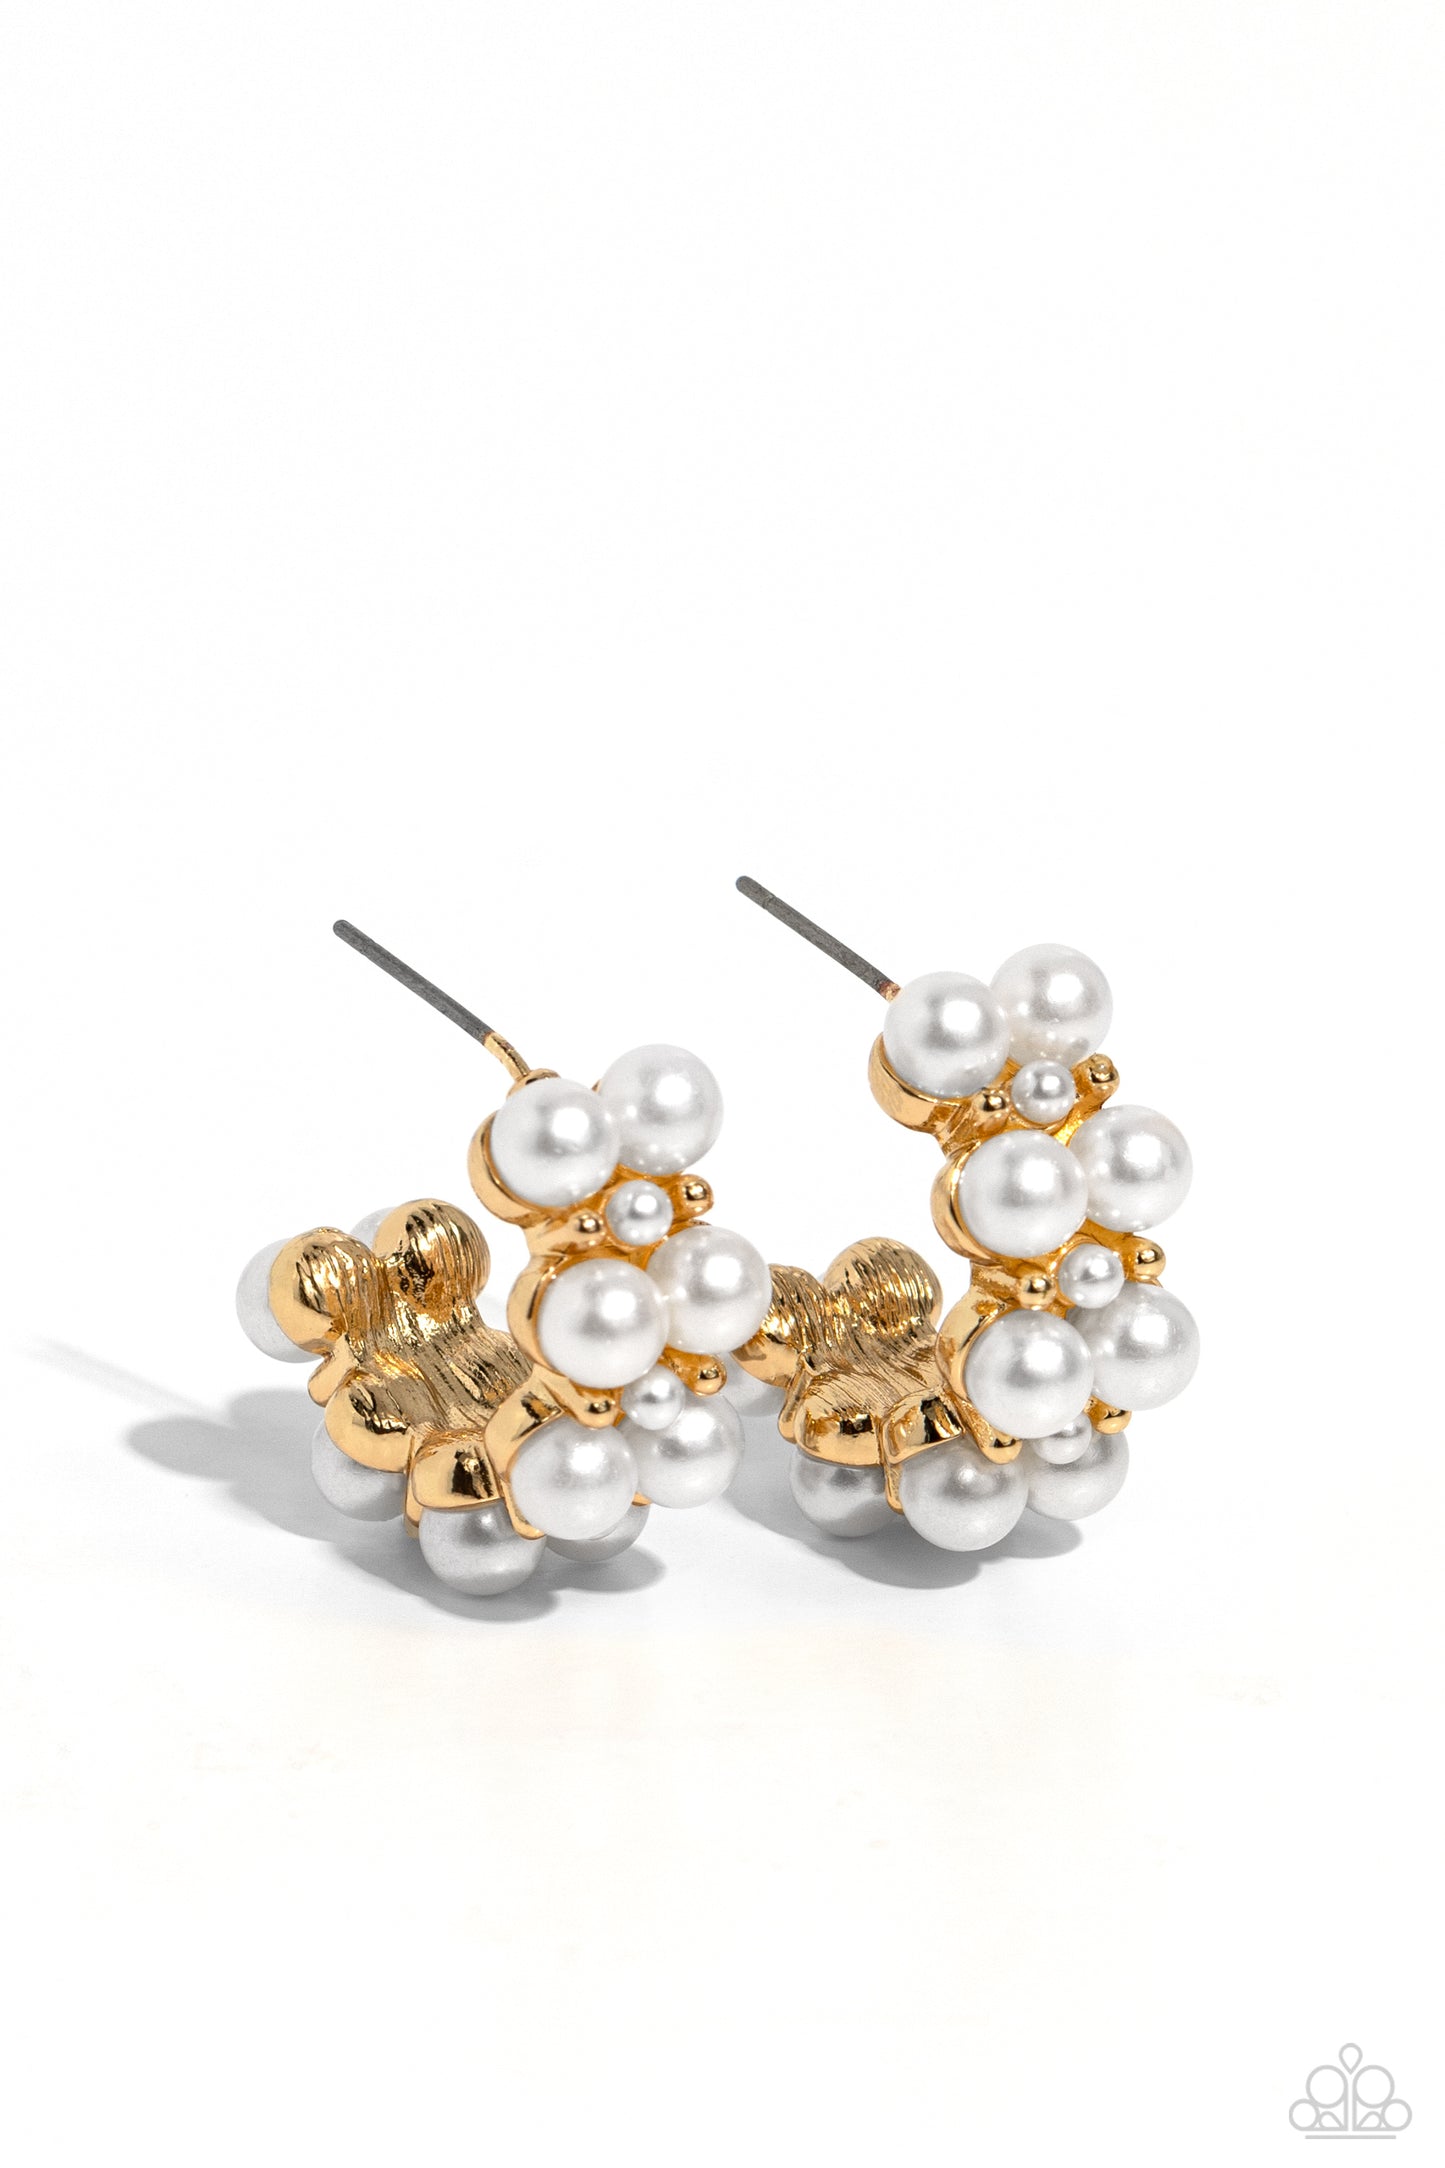 Paparazzi Accessories - White Collar Wardrobe - Gold Eascalloptwo rows of bubbly white pearls stack and form into a scalloped pattern. Daintily curling around the ear, the bubbly effect of the high-sheen gold studs and daintier pearls separating the larger pearls creates a radiant, refined hoop. Earring attaches to a standard post fitting. Hoop measures approximately 1" in diameter.  Sold as one pair of hoop earrings.